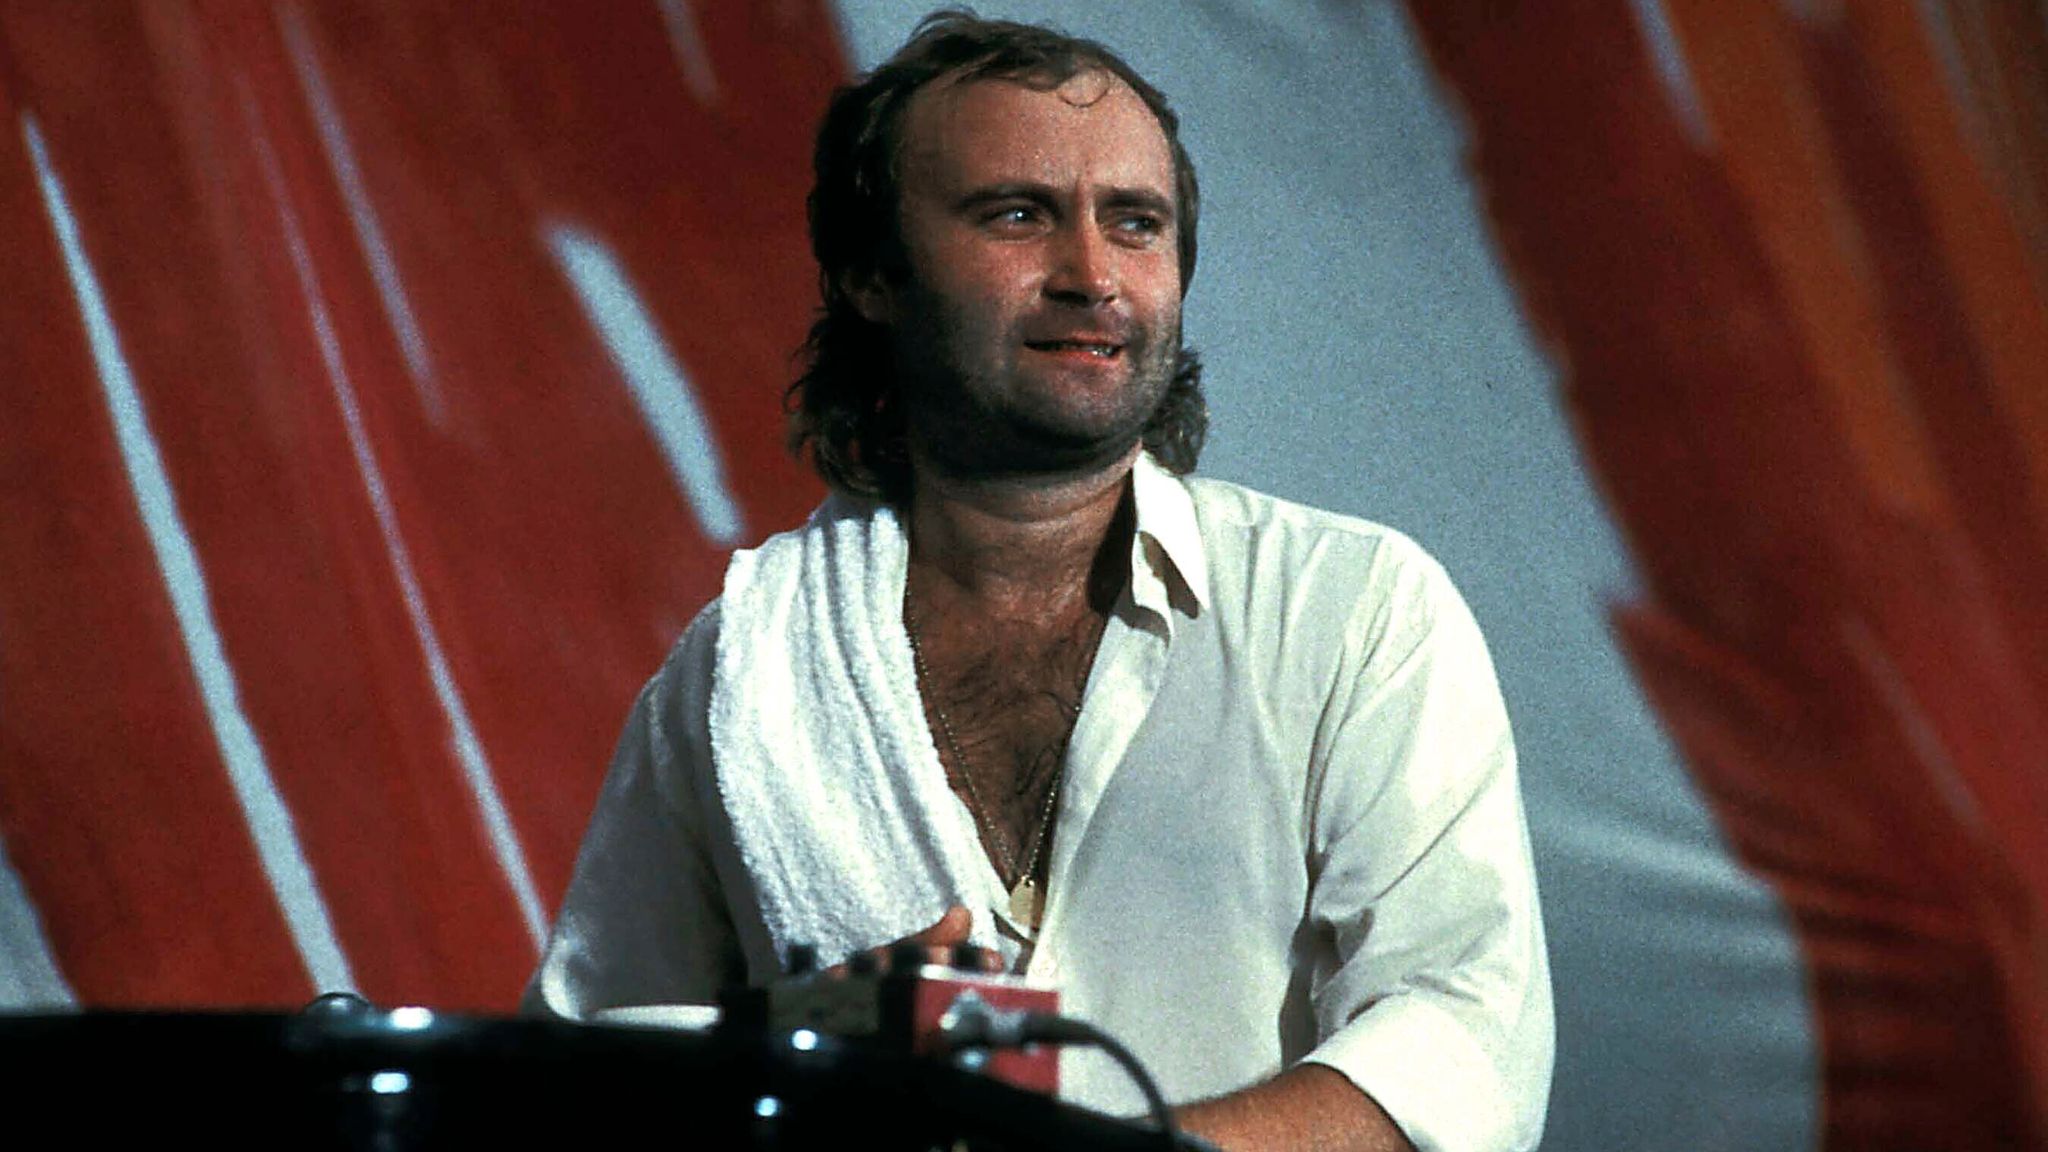 #39 The Phil Collins Effect #39 : Older pop stars given hope by former Genesis